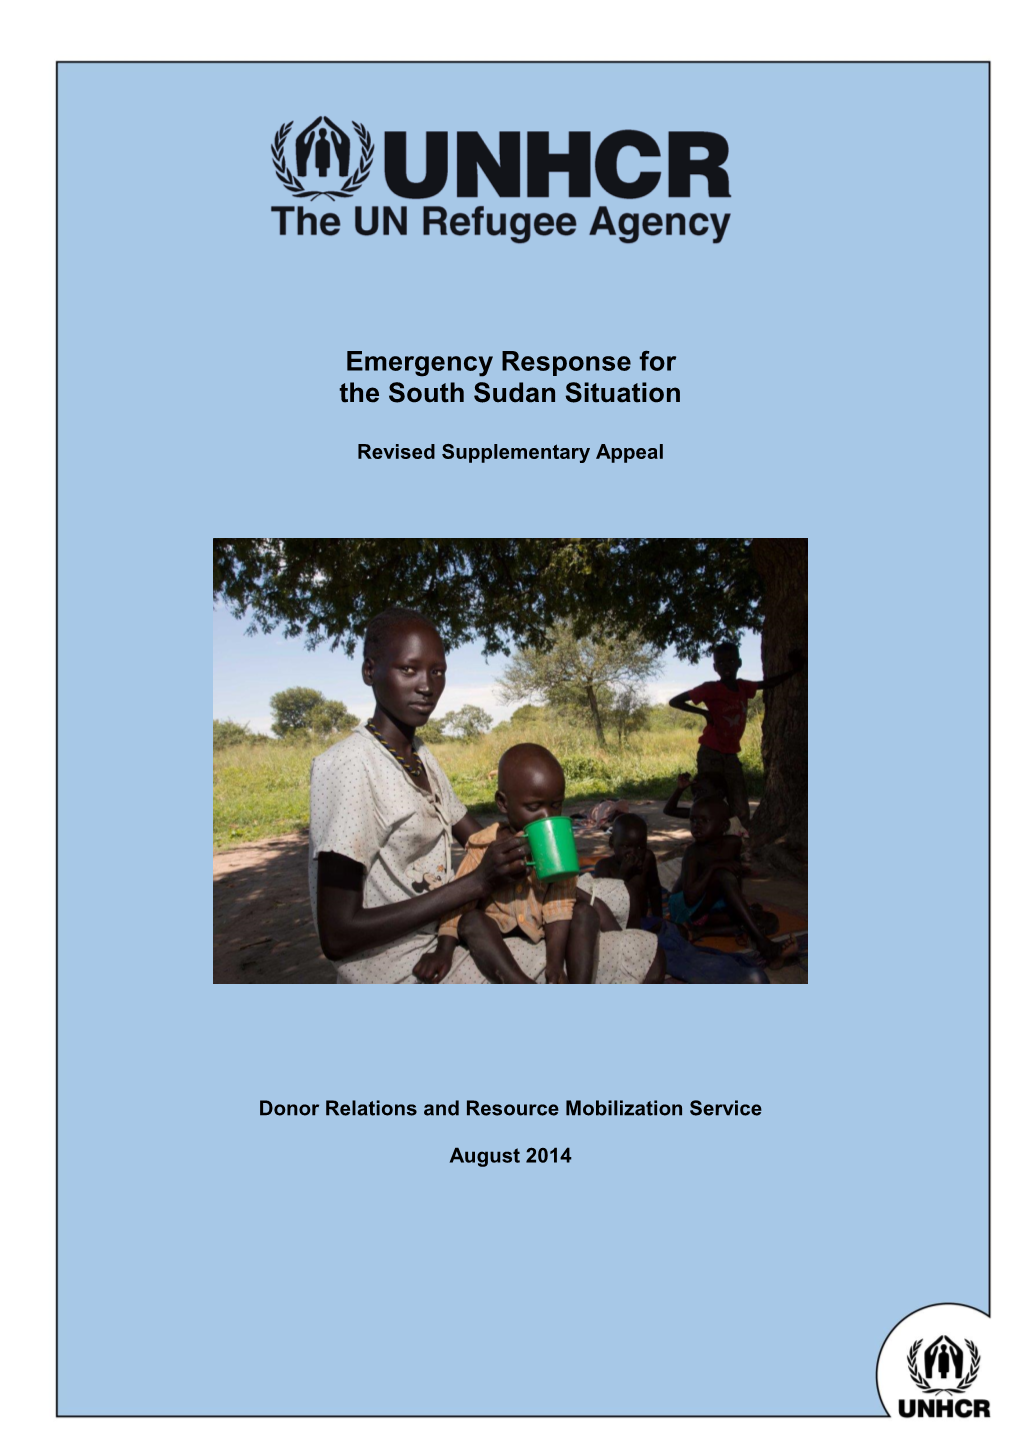 Emergency Response for the South Sudan Situation